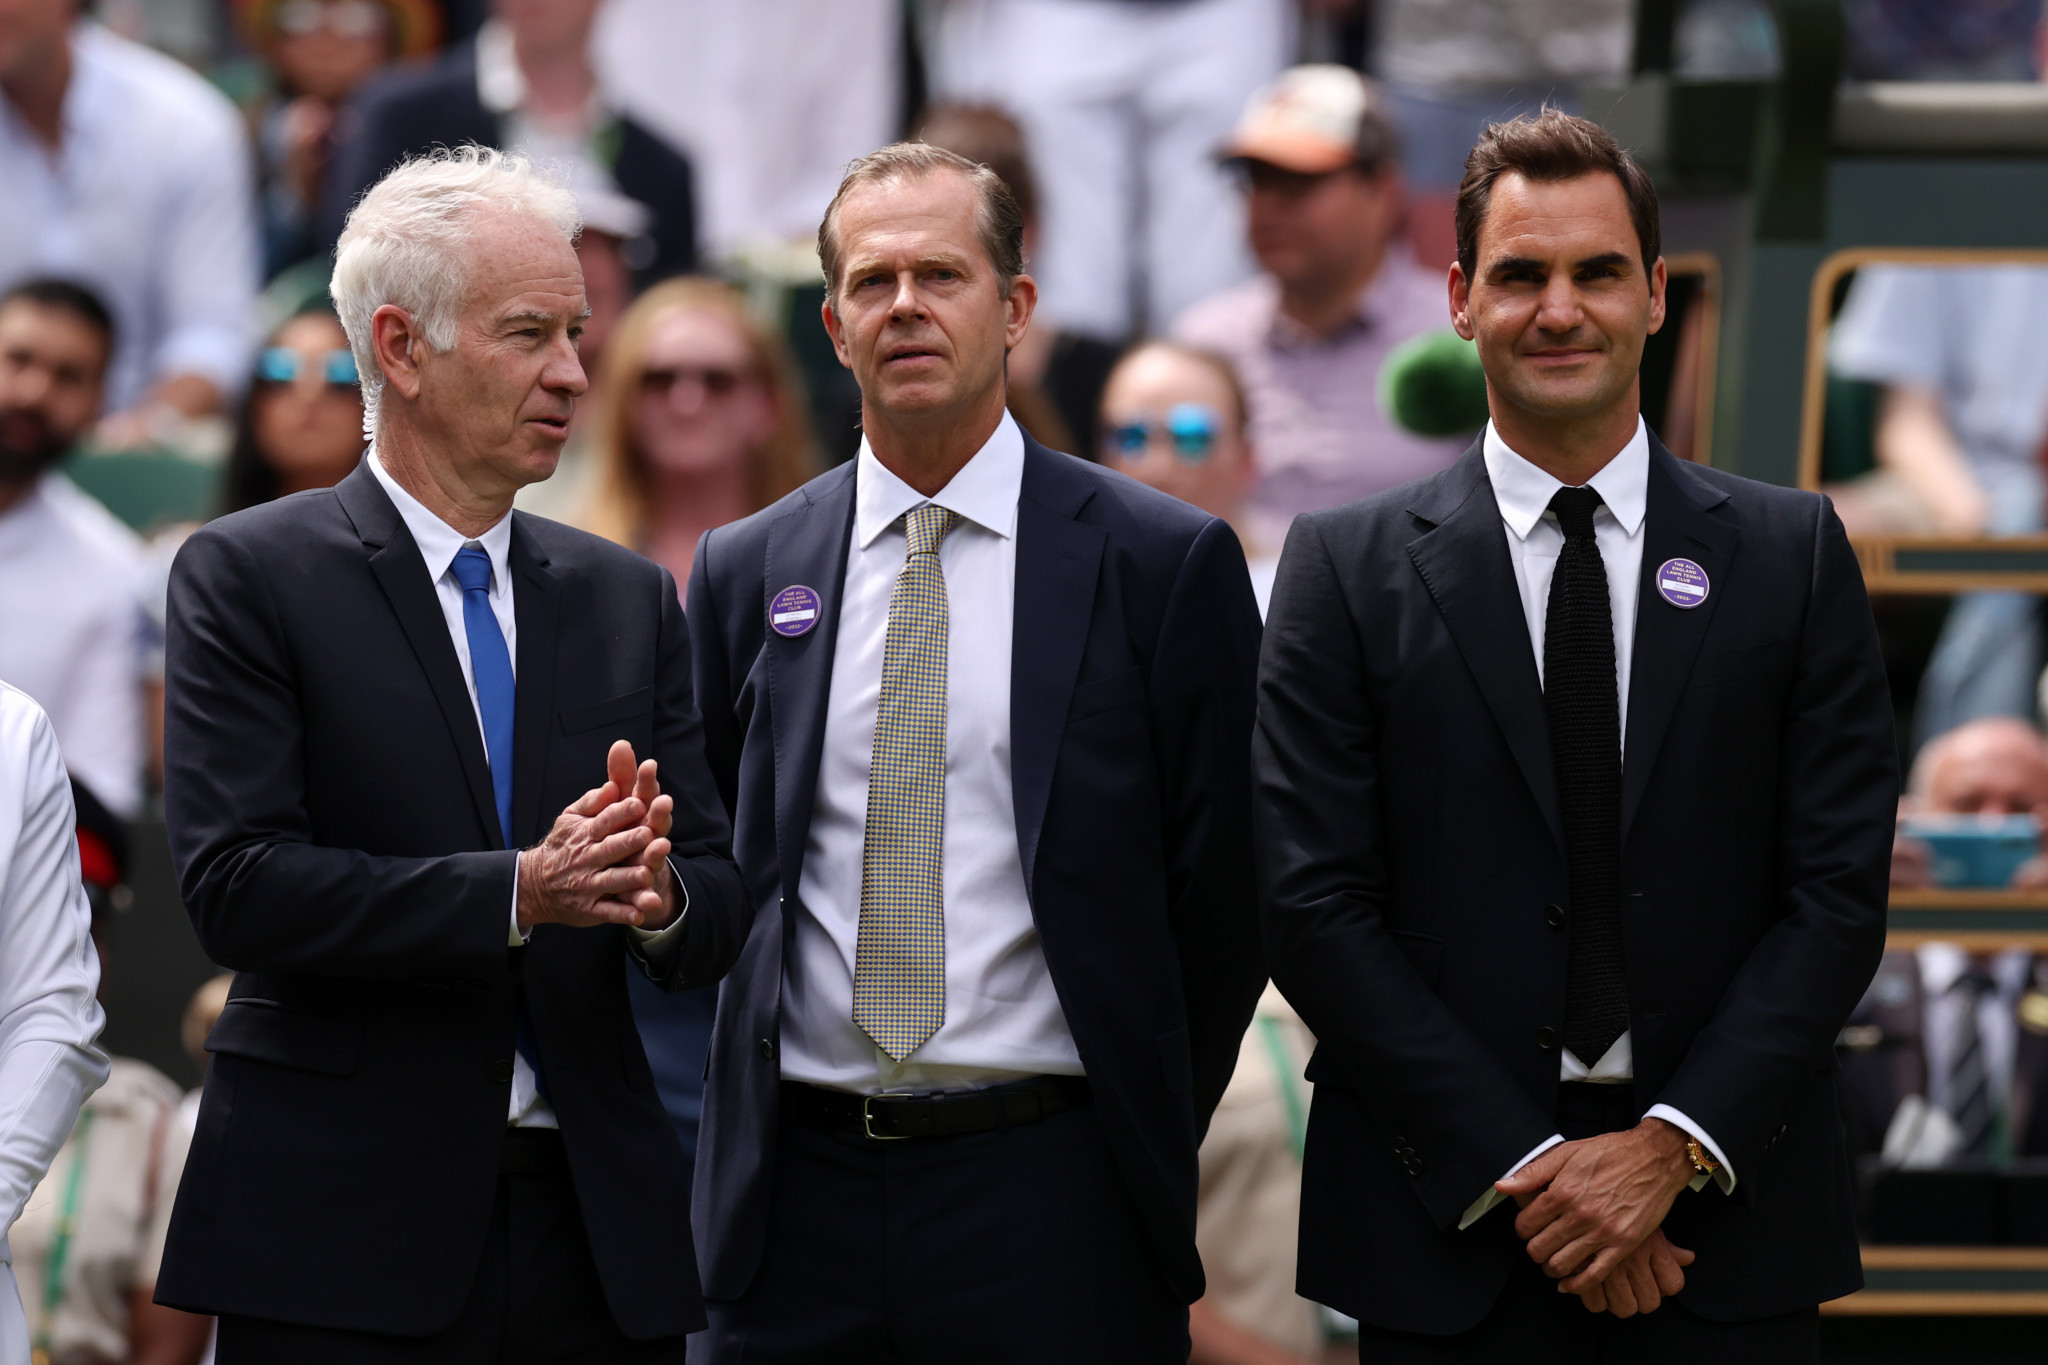 John McEnroe, Stefan Edberg and Roger Federer were some of the past winners welcomed onto Centre Court to celebrate the venue's centenary ©Getty Images